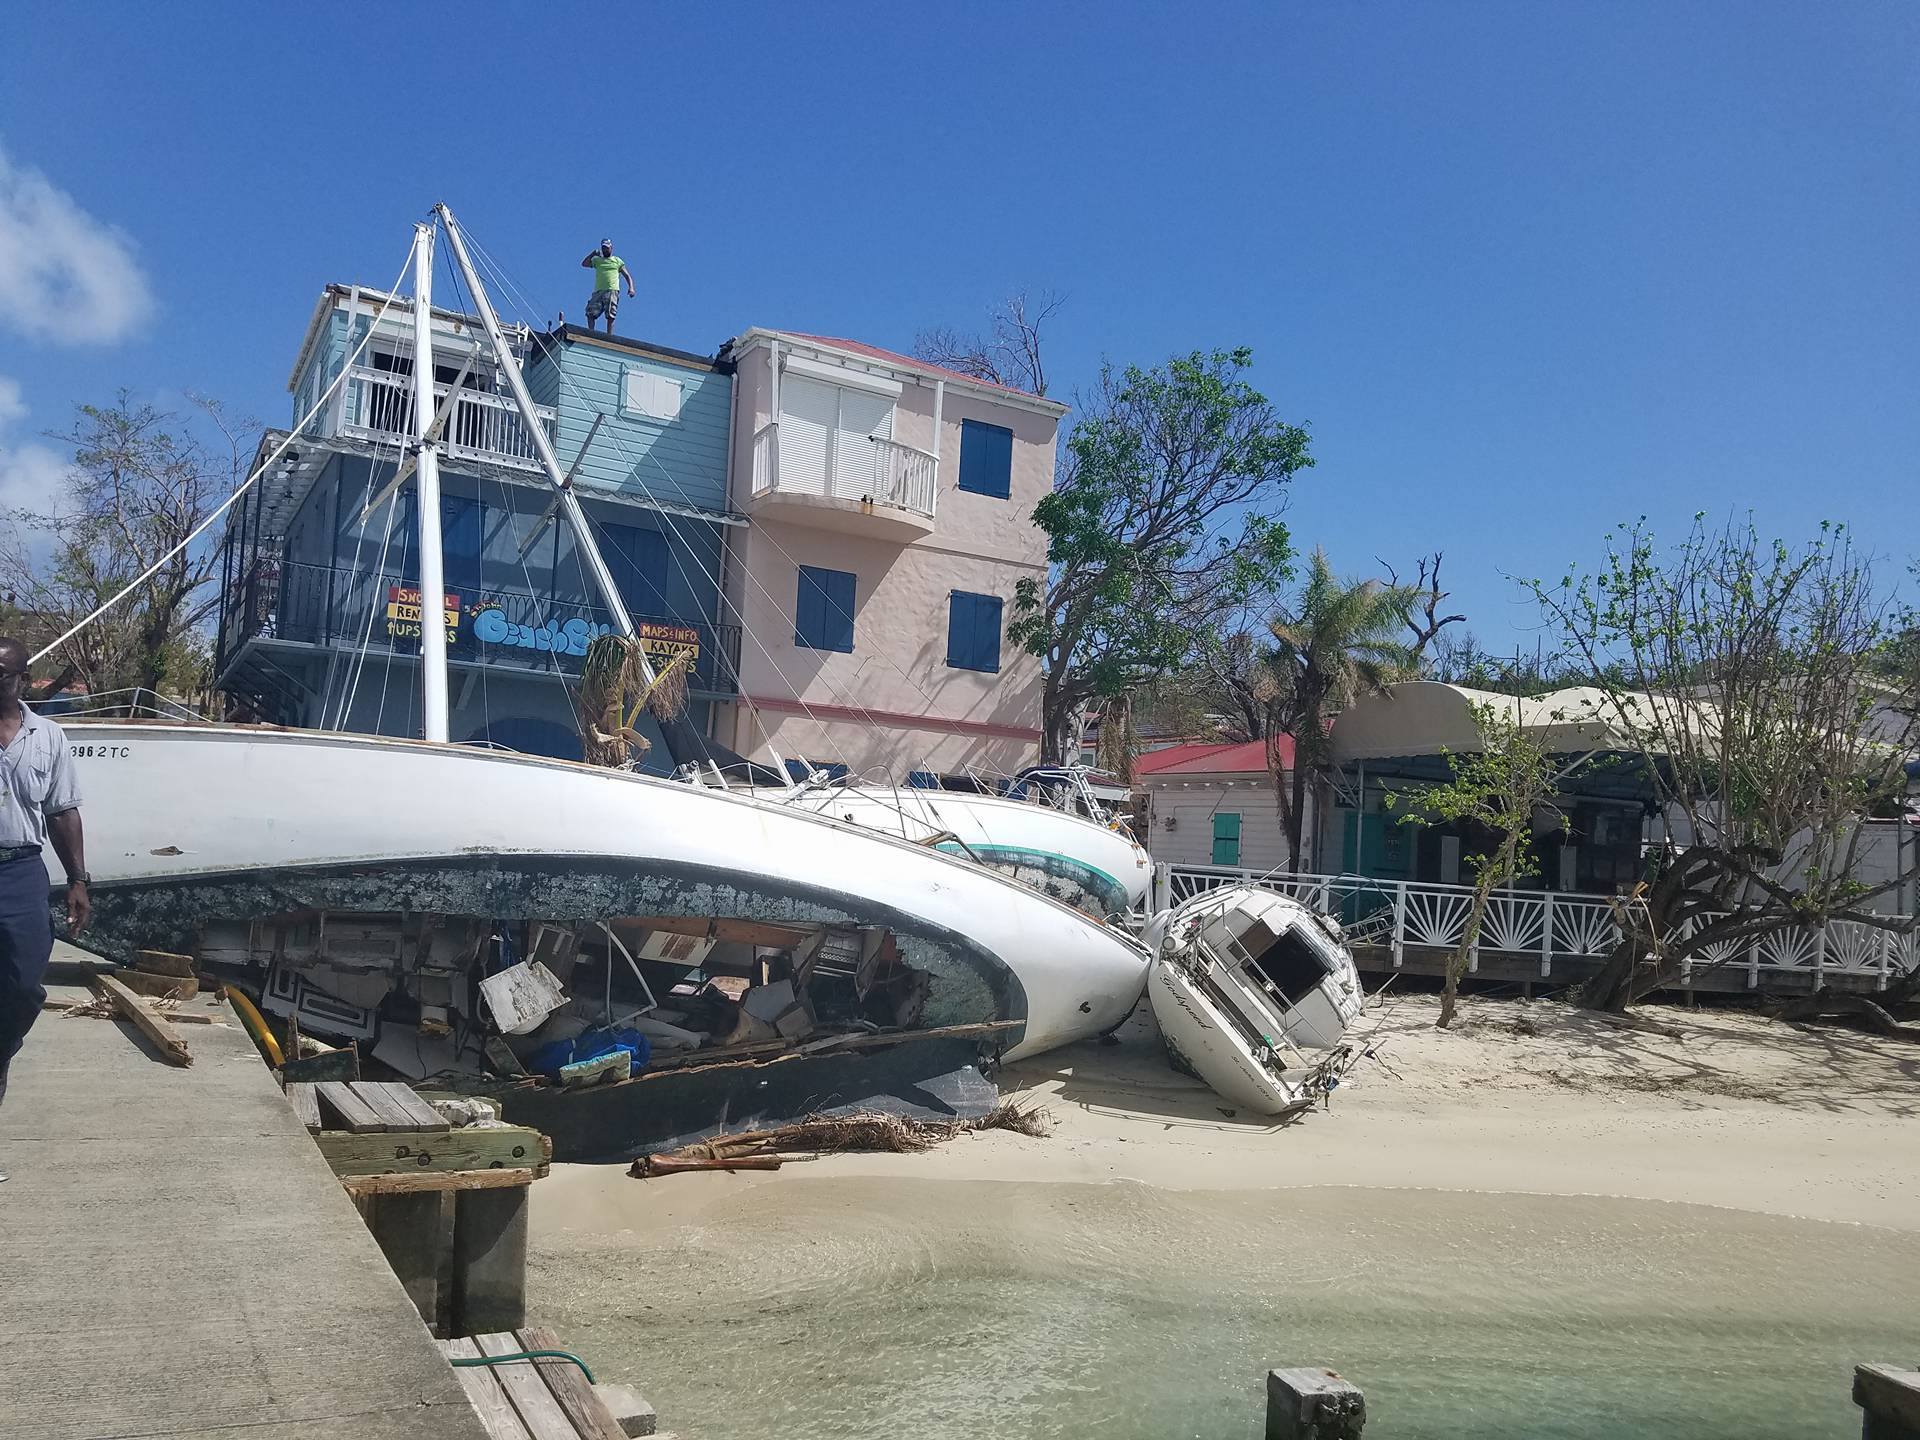 Wreckage of dock with the ship “The Vagrant” run aground. Photo taken by Emma Graham-Winkles in the United States Virgin Islands Oct. 2017. 